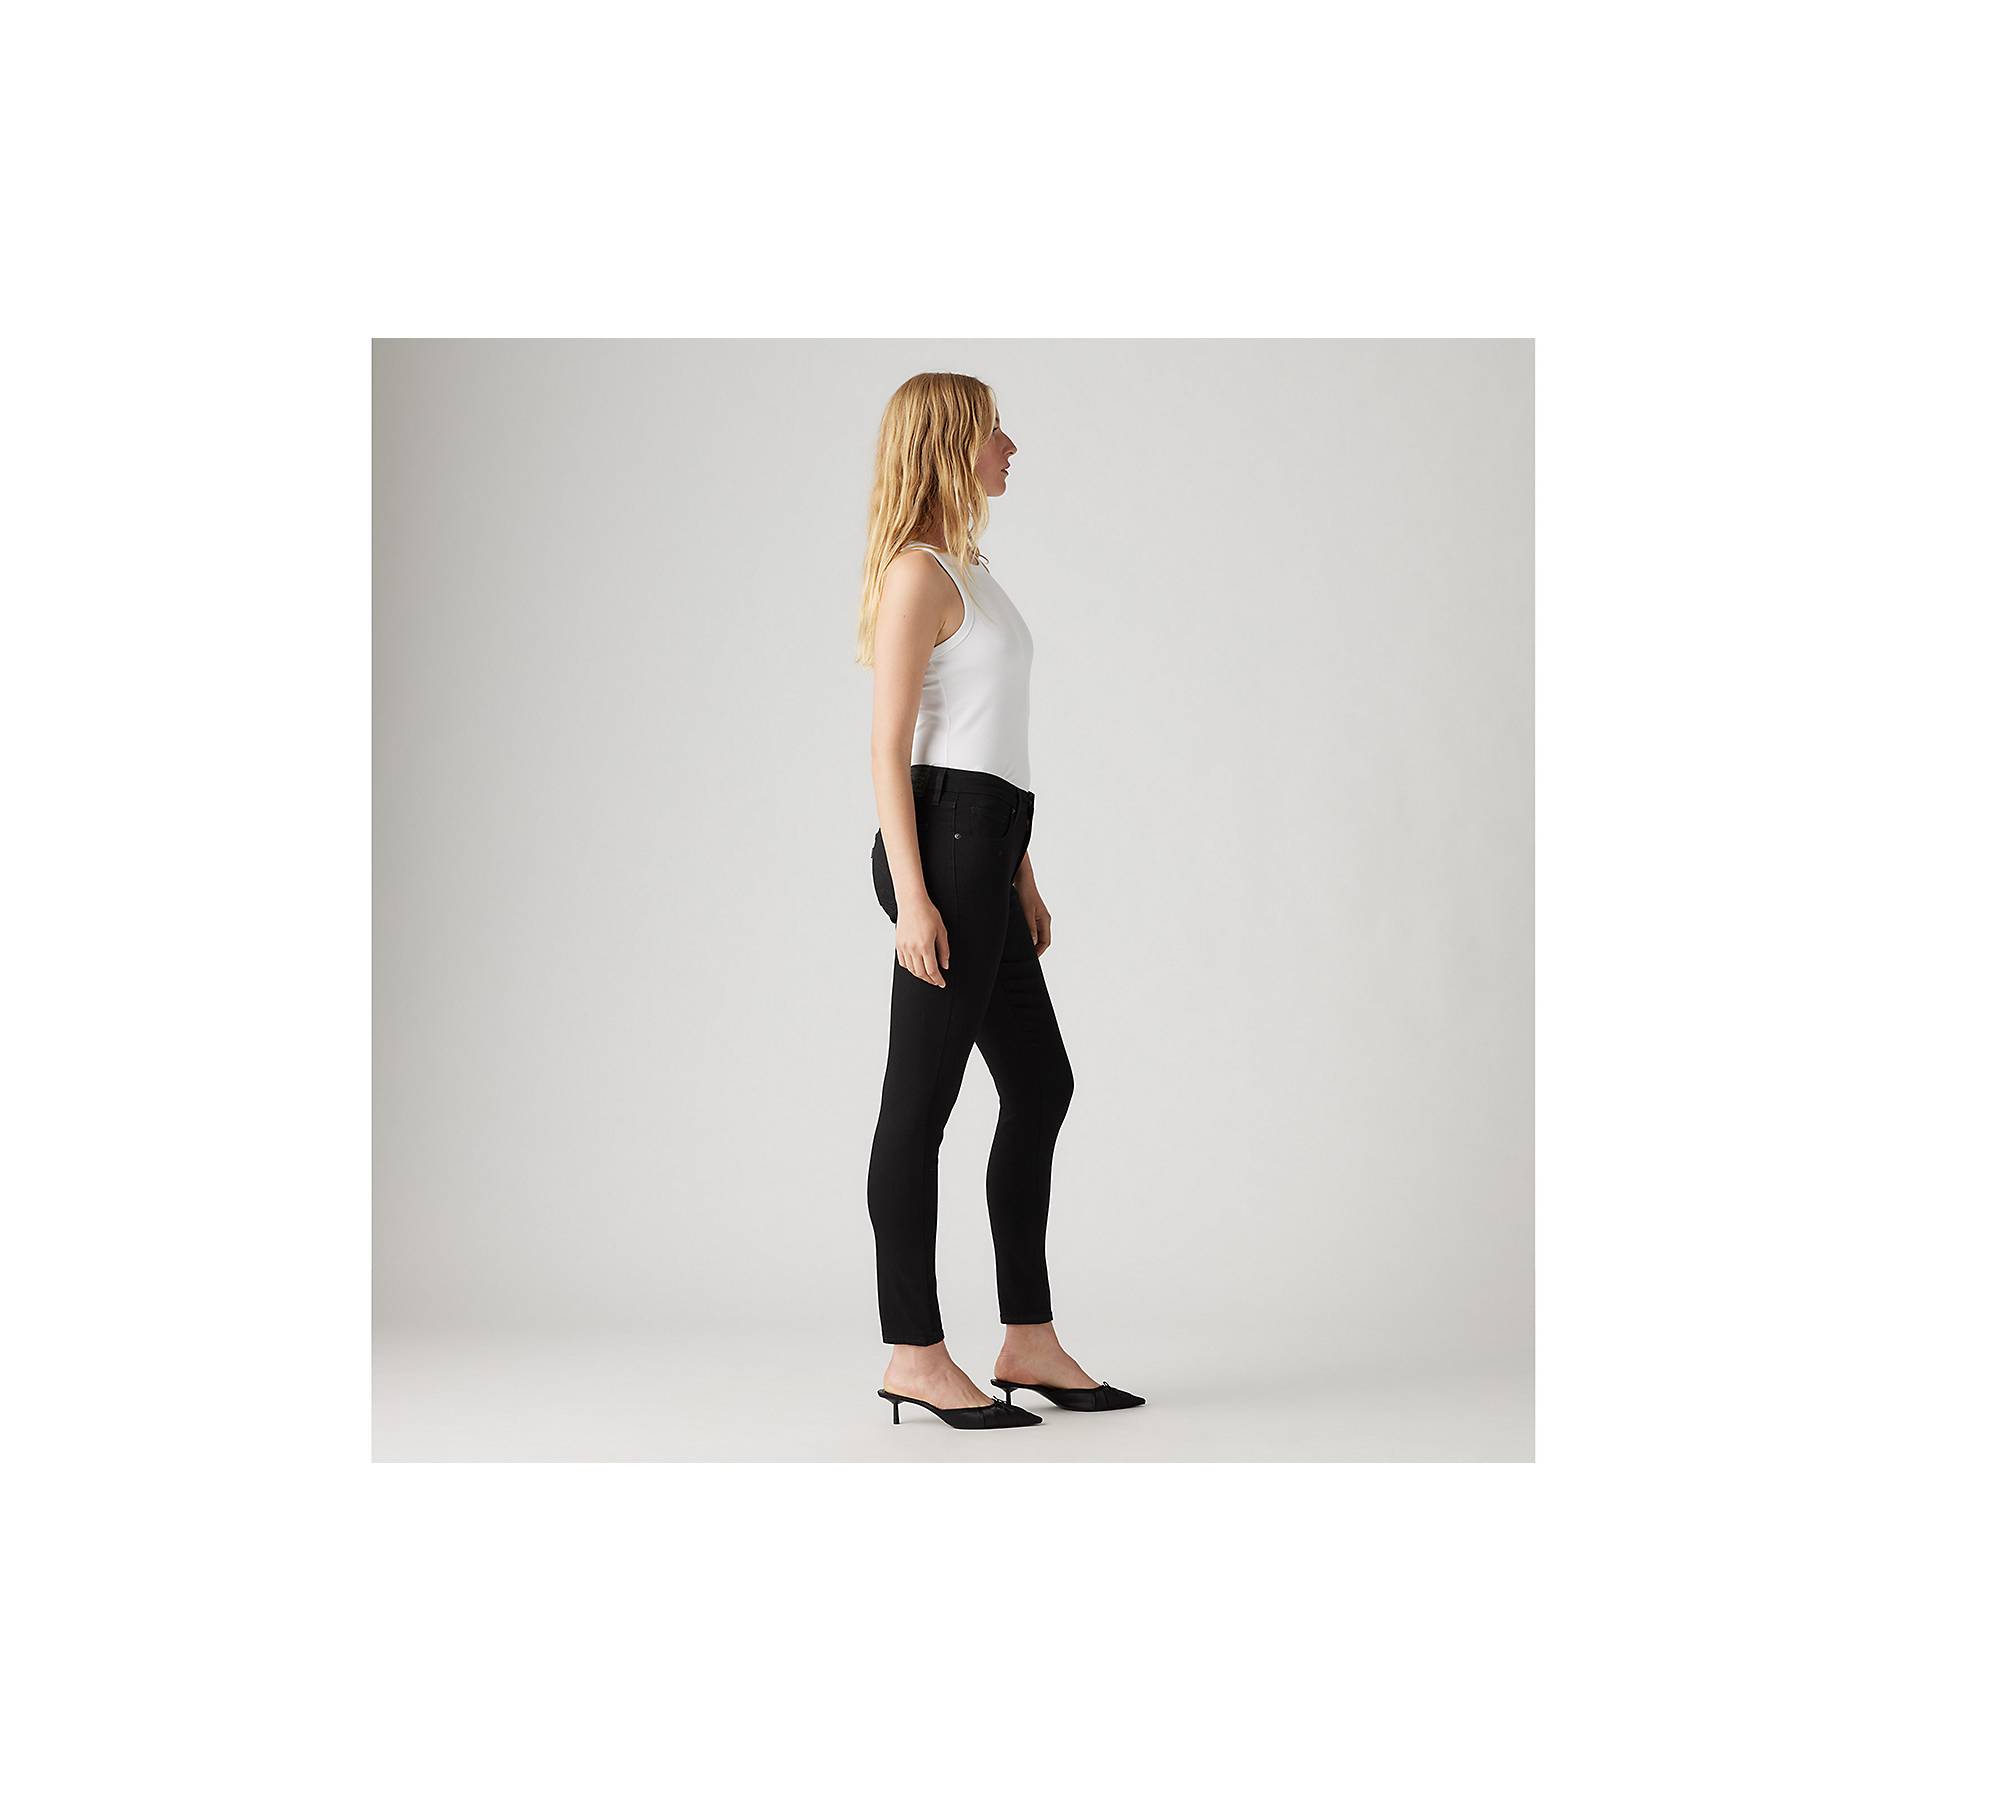 Women's High Waisted Ponte Flare Leggings With Pockets - A New Day™ Black S  : Target